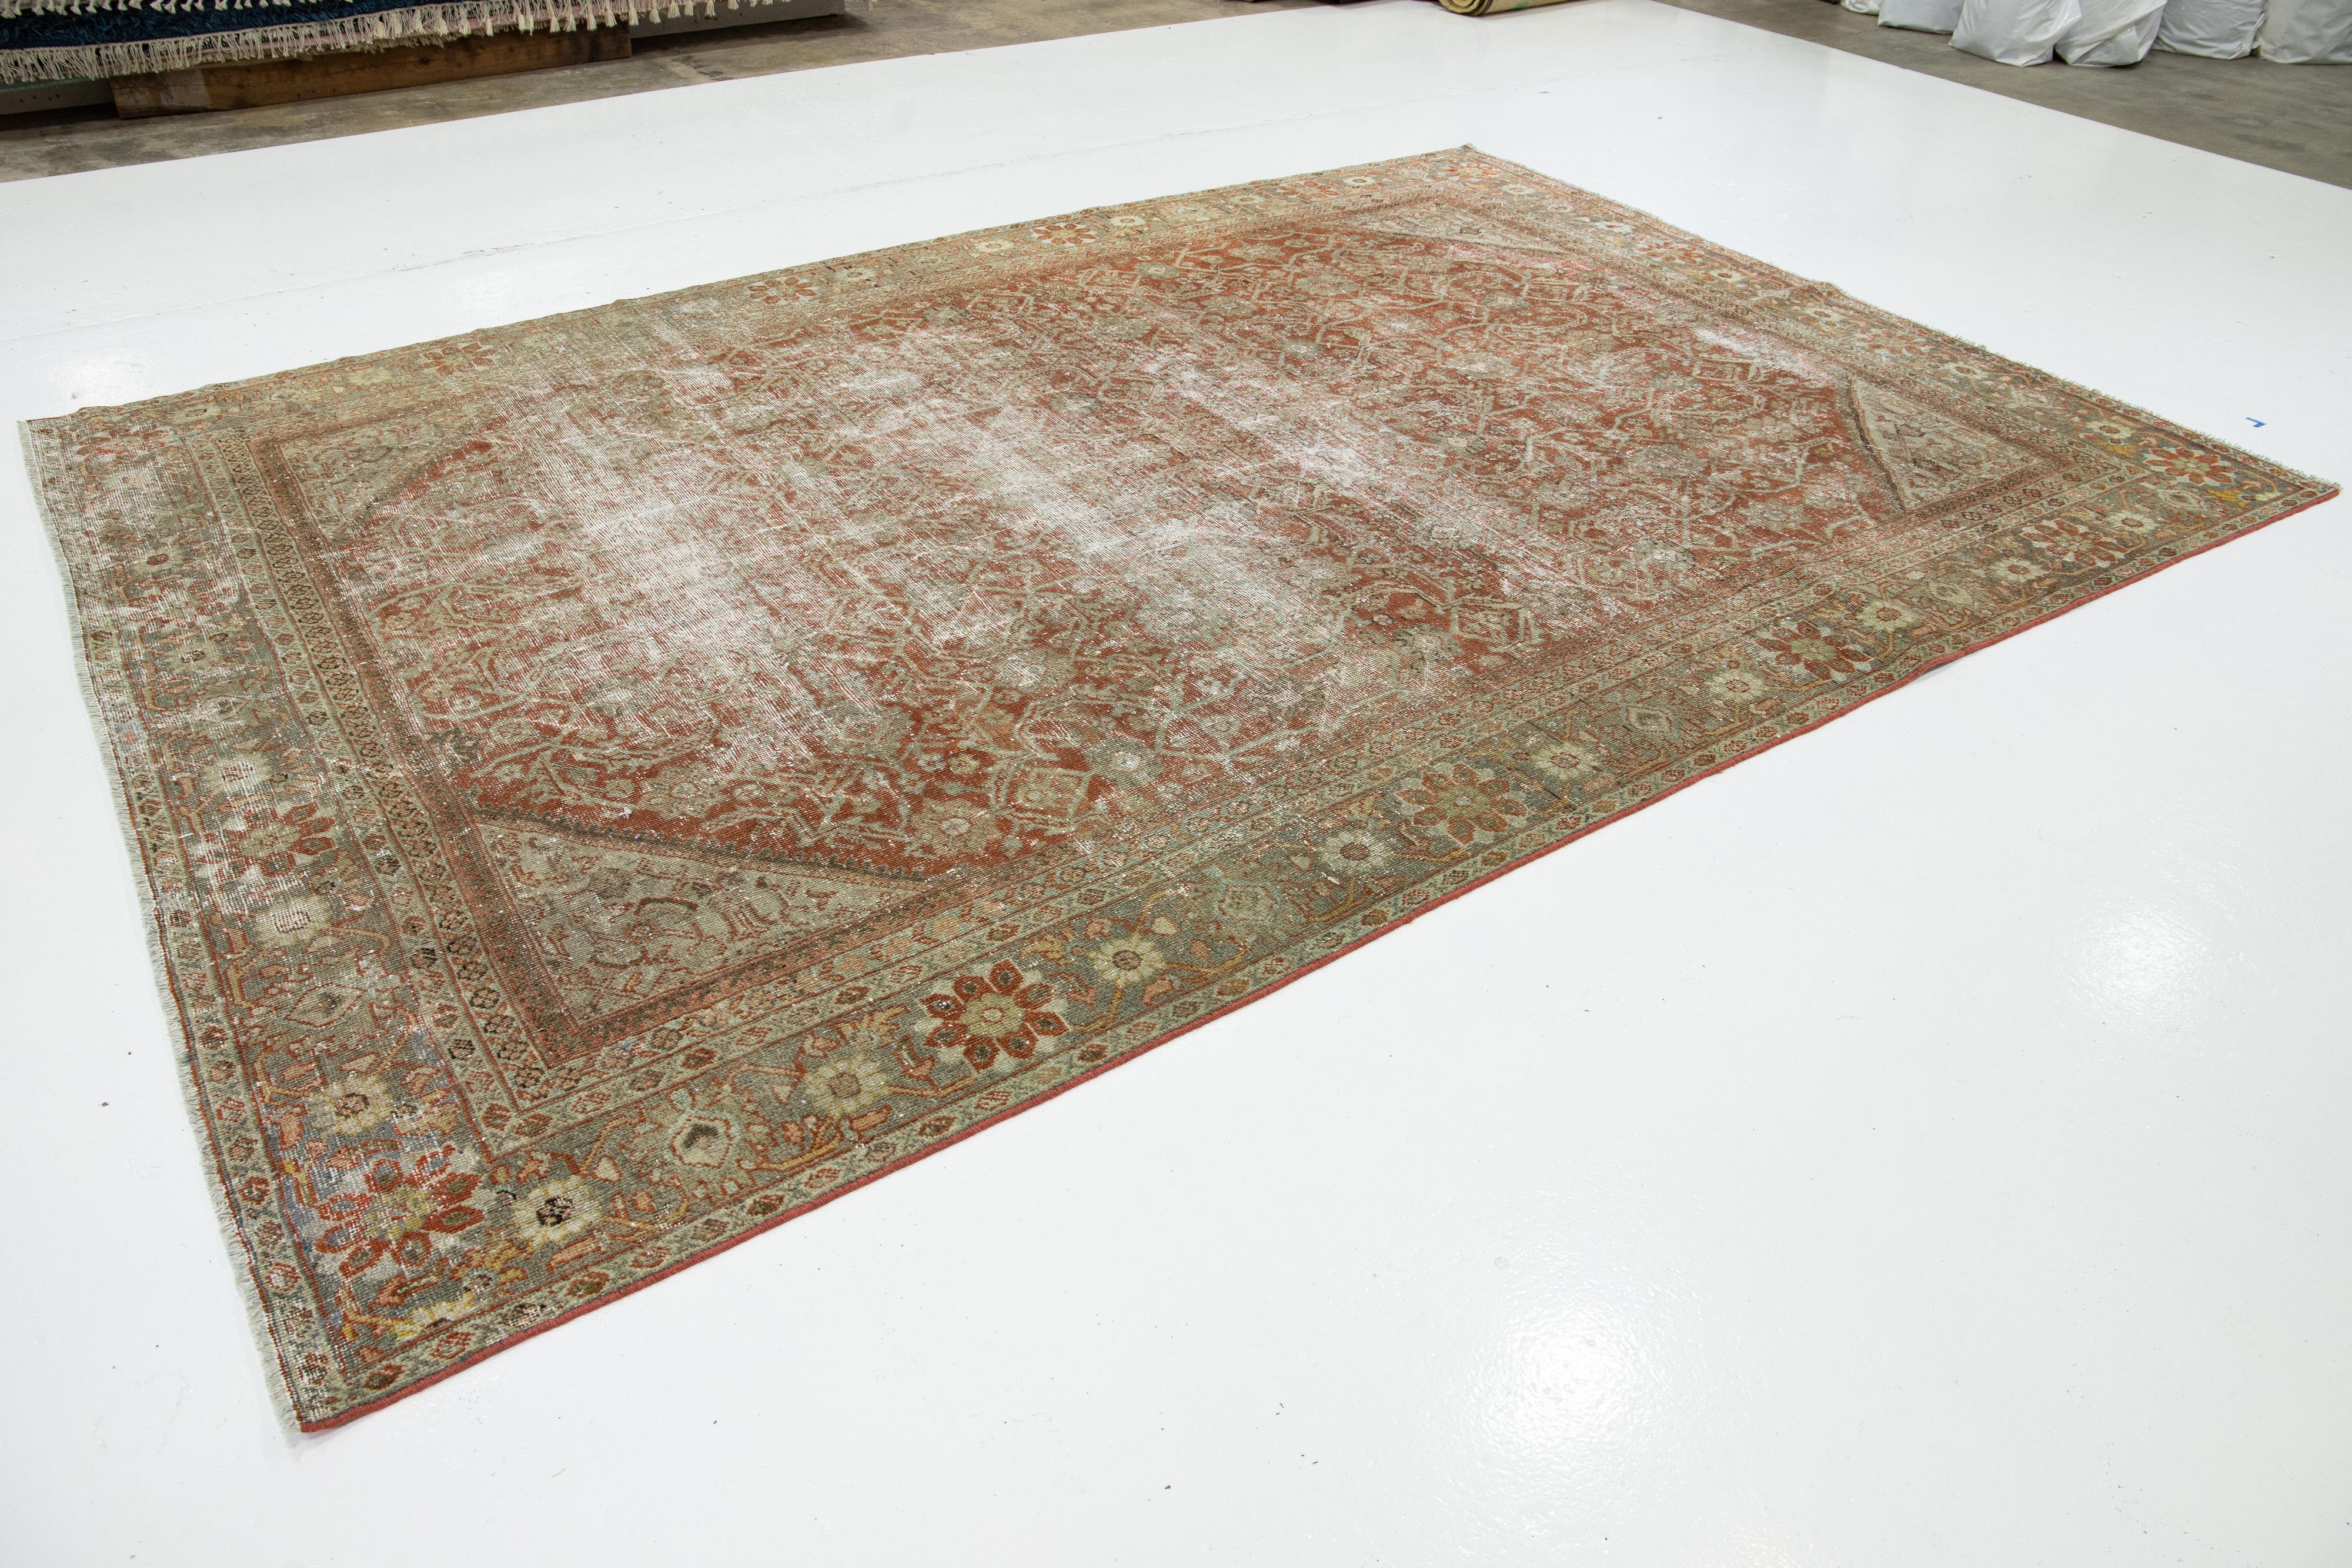 Handmade Antique Persian Mahal Wool Rug In Rust Color with Allover Design In Good Condition For Sale In Norwalk, CT